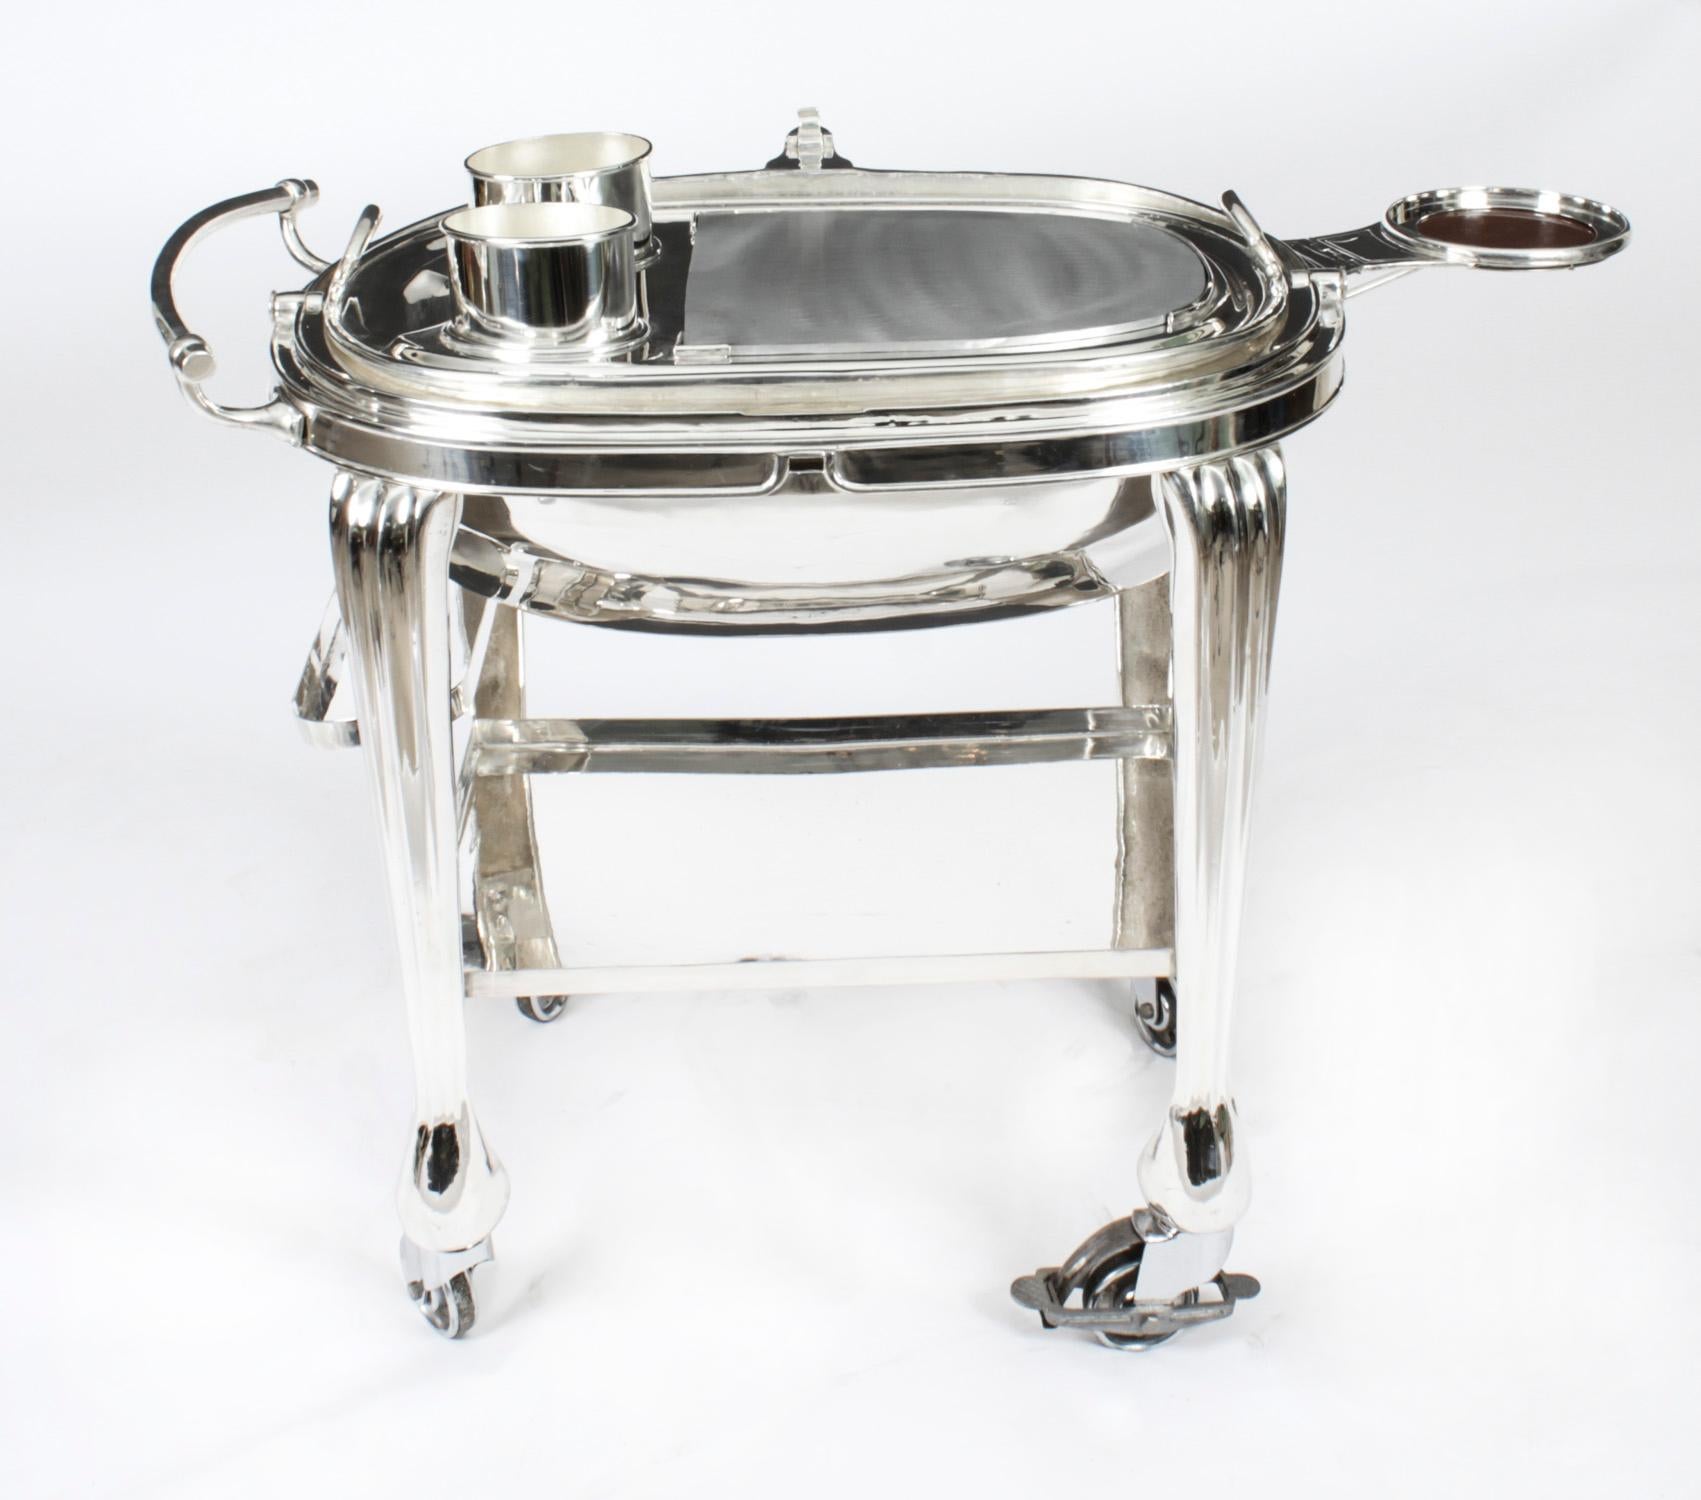 Mid-20th Century Antique Art Deco Silver Plated Beef Carving Trolley Cart by Elkington 1930s